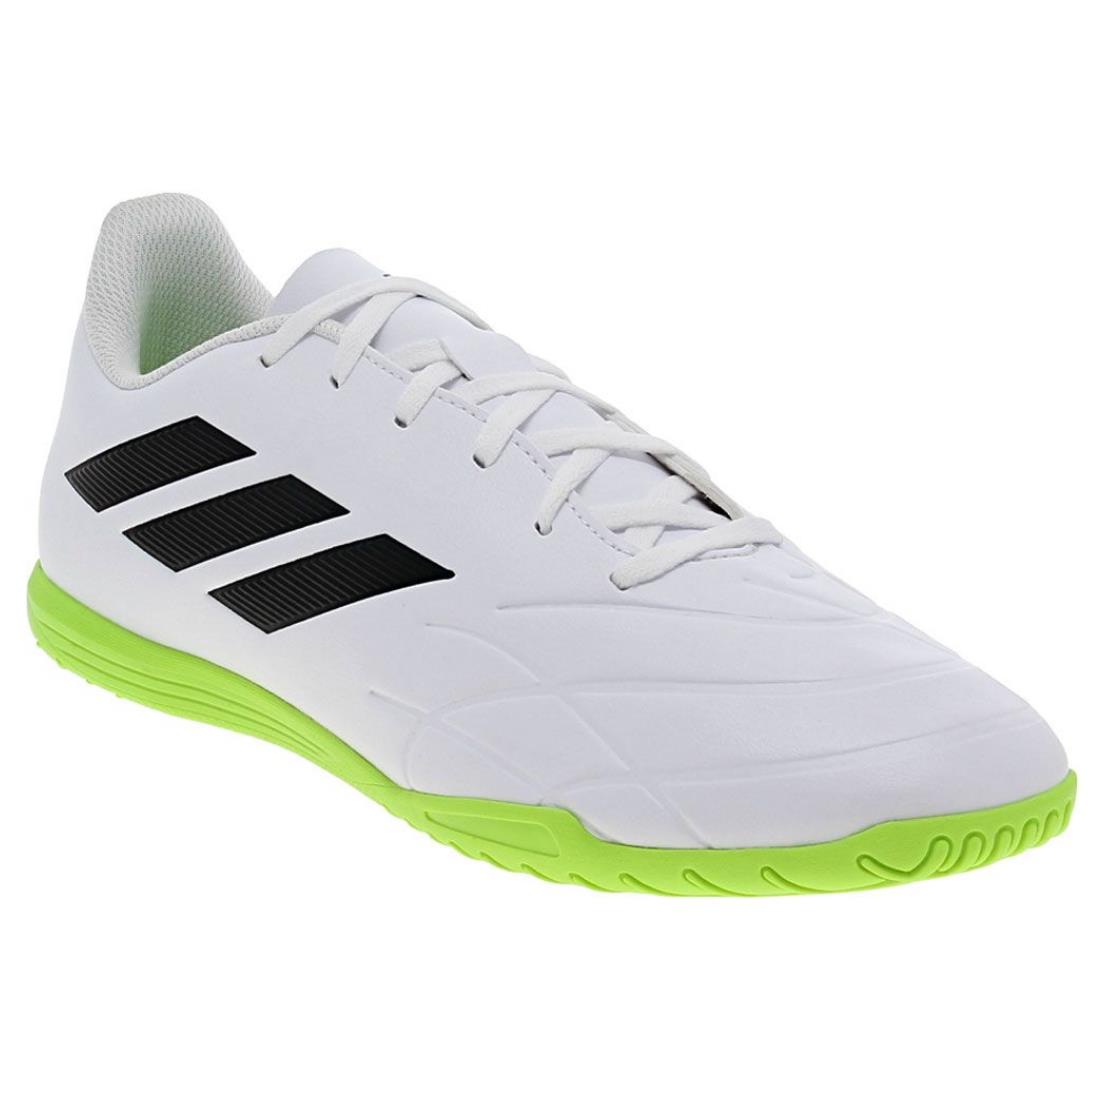 Adidas Copa Pure.4 In Indoor Soccer Shoes - Mens 7.5 US